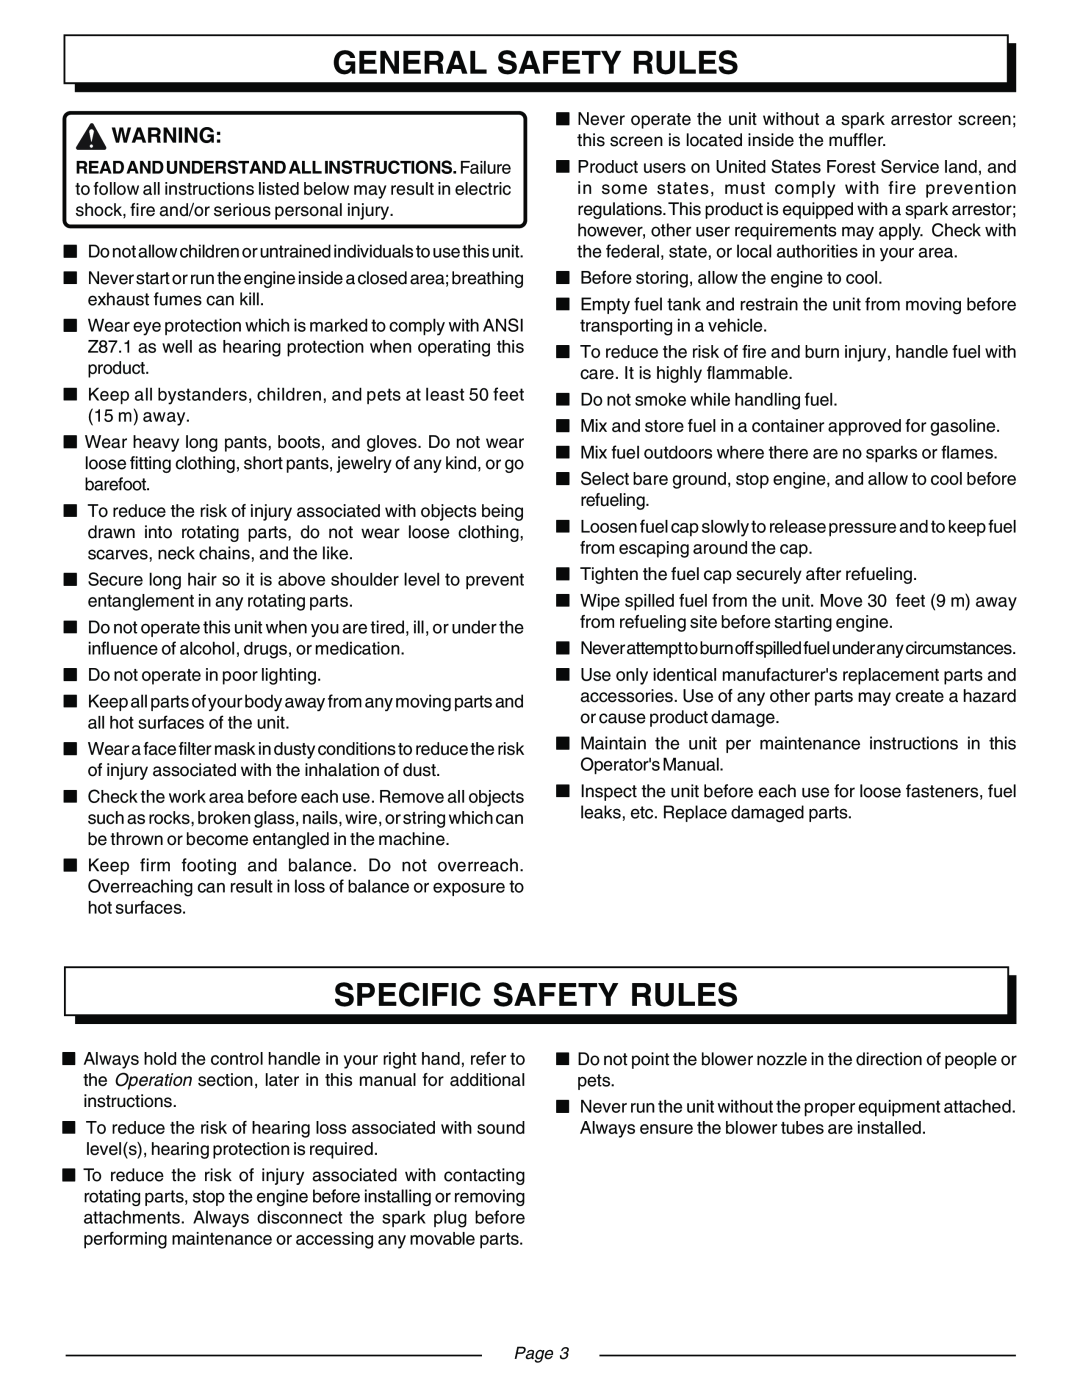 Homelite UT08570, UT08571 manual General Safety Rules, Specific Safety Rules, Page 